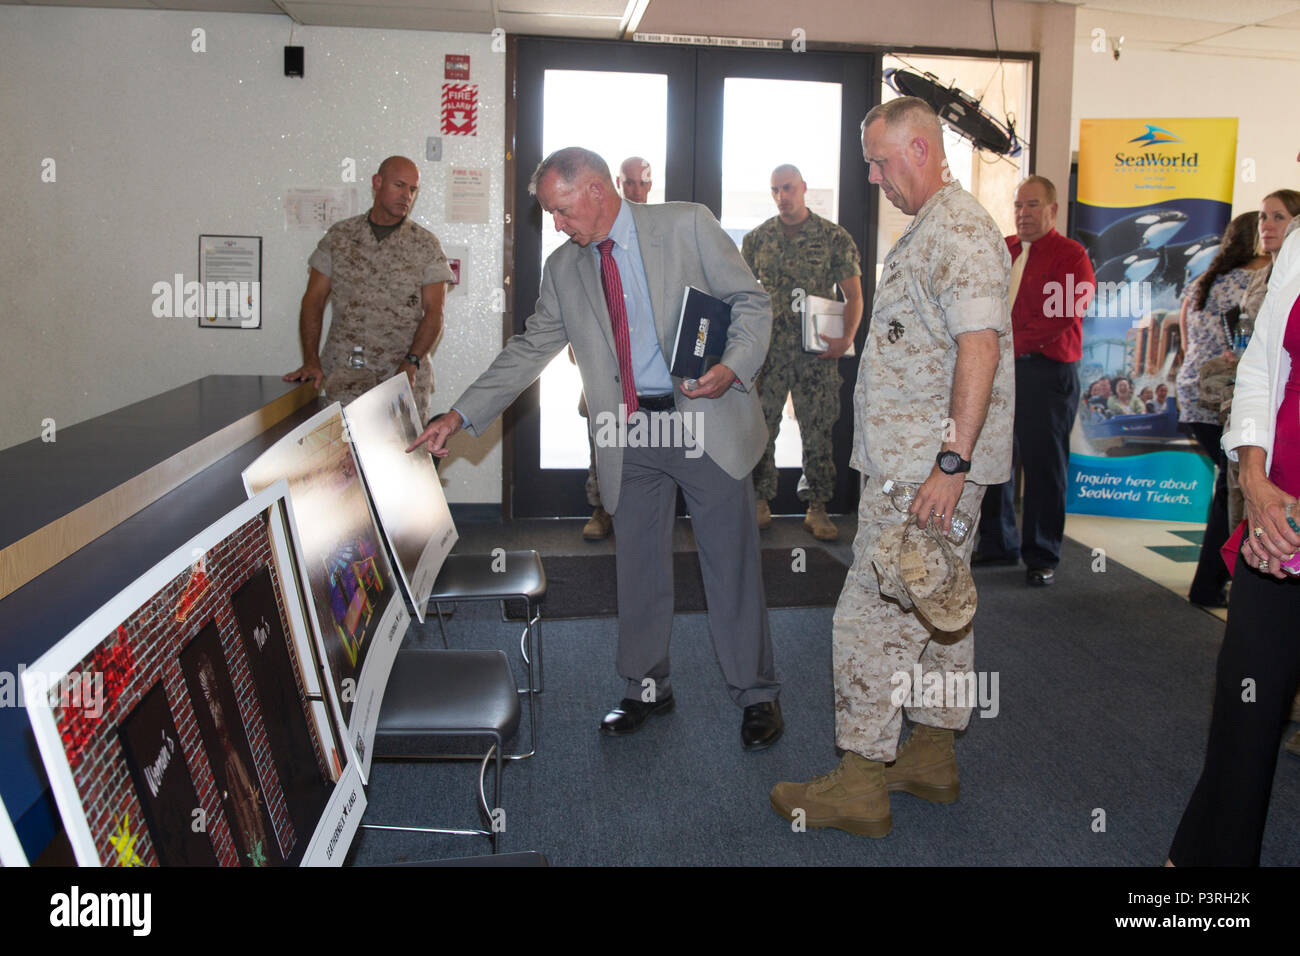 Lee Farmer, Marine Corps Community Services Assitant Chief of Staff, Marine Corps Installations West, deatails the progress of the Marine Corps Logistics Base Barstow bowling alley to BGen. Kevin Killea, Commanding General of Marine Corps Installations West – Marine Corps Base Camp Pendleton, July 25, 2016. BGen. Killea’s tour included visits to the installation’s Marine Corps Community Services facilities, Marine Depot Maintenance Center, and Fleet Support Division.  (U.S. Marine Corps photo by Carlos Guerra, MCLBB Combat Camera/Released) Stock Photo